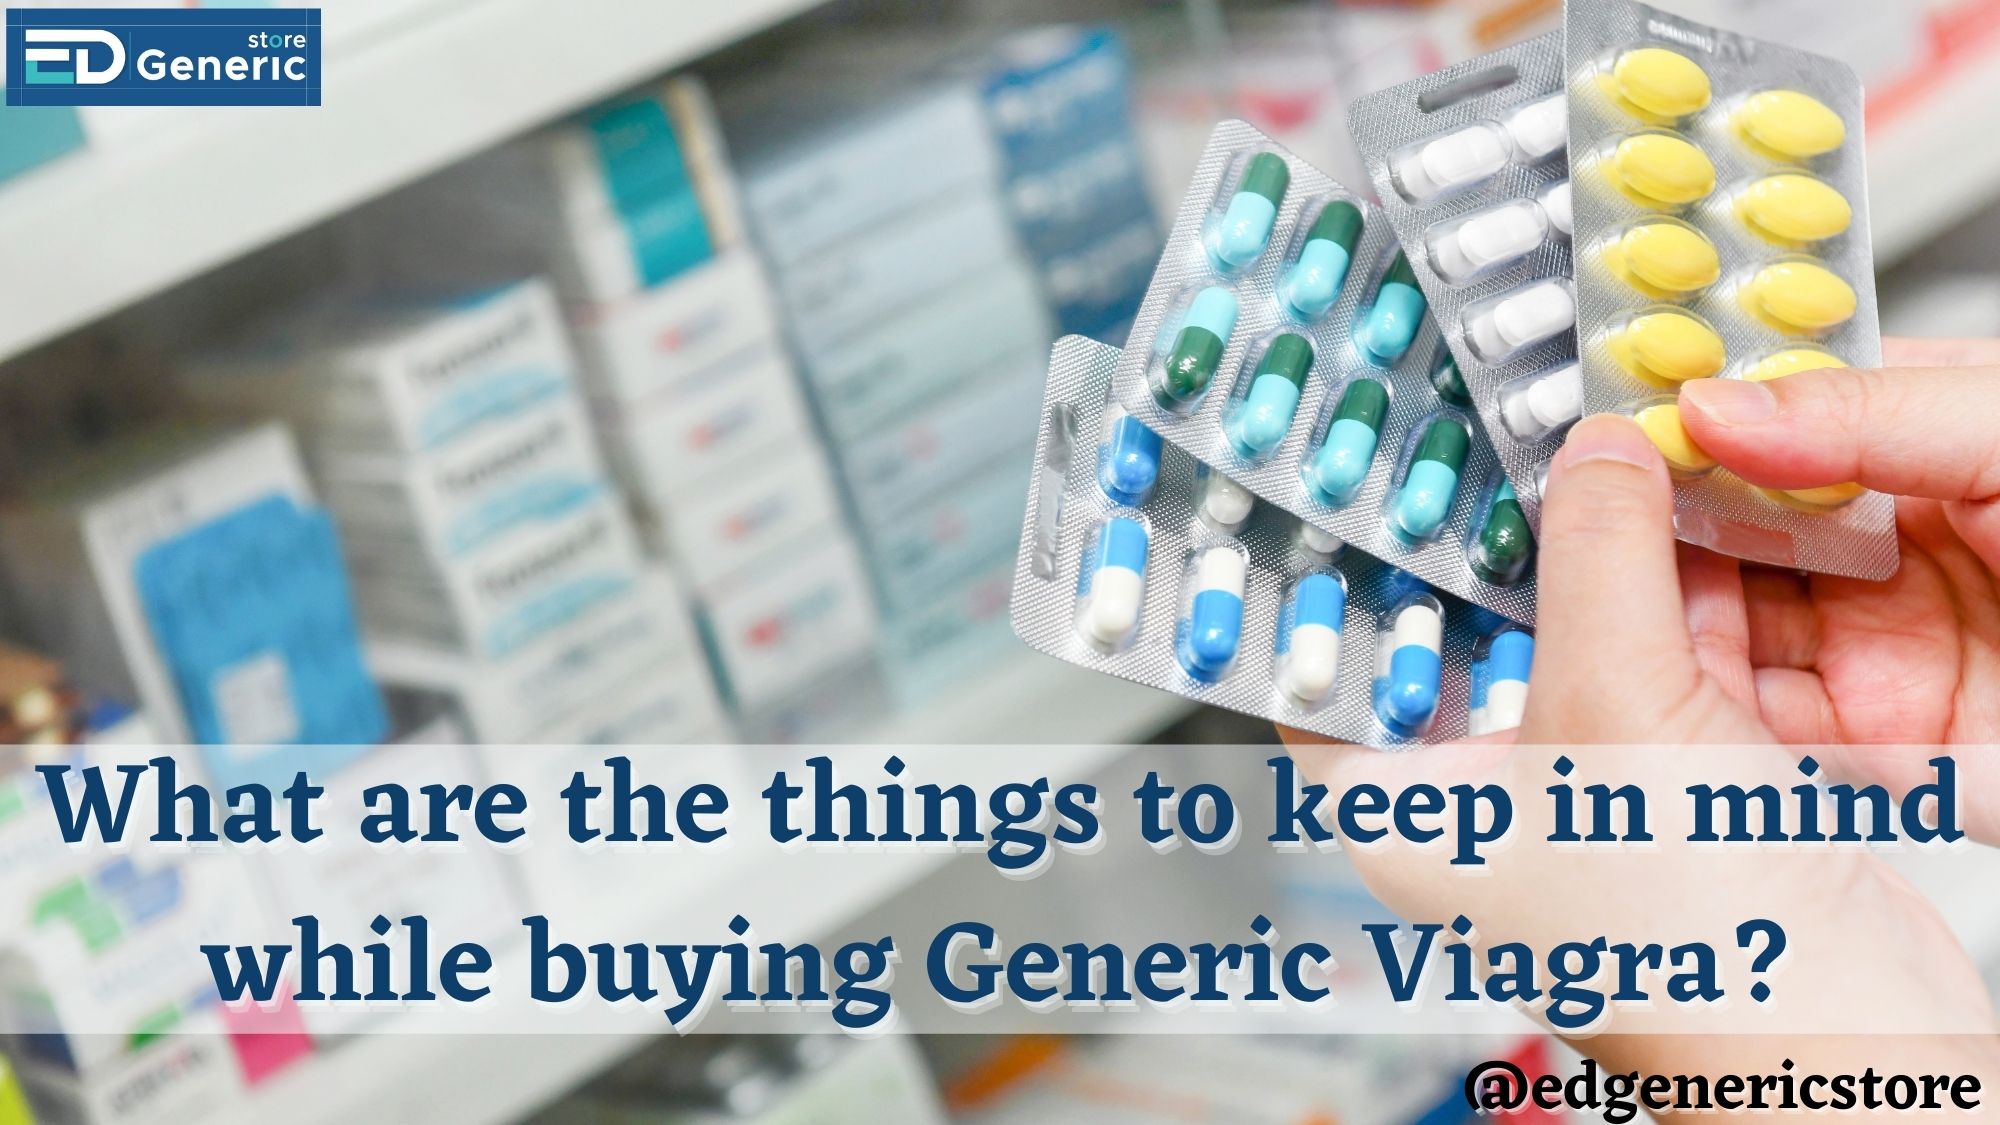 mind while buying Generic Viagra at Ed Generic store